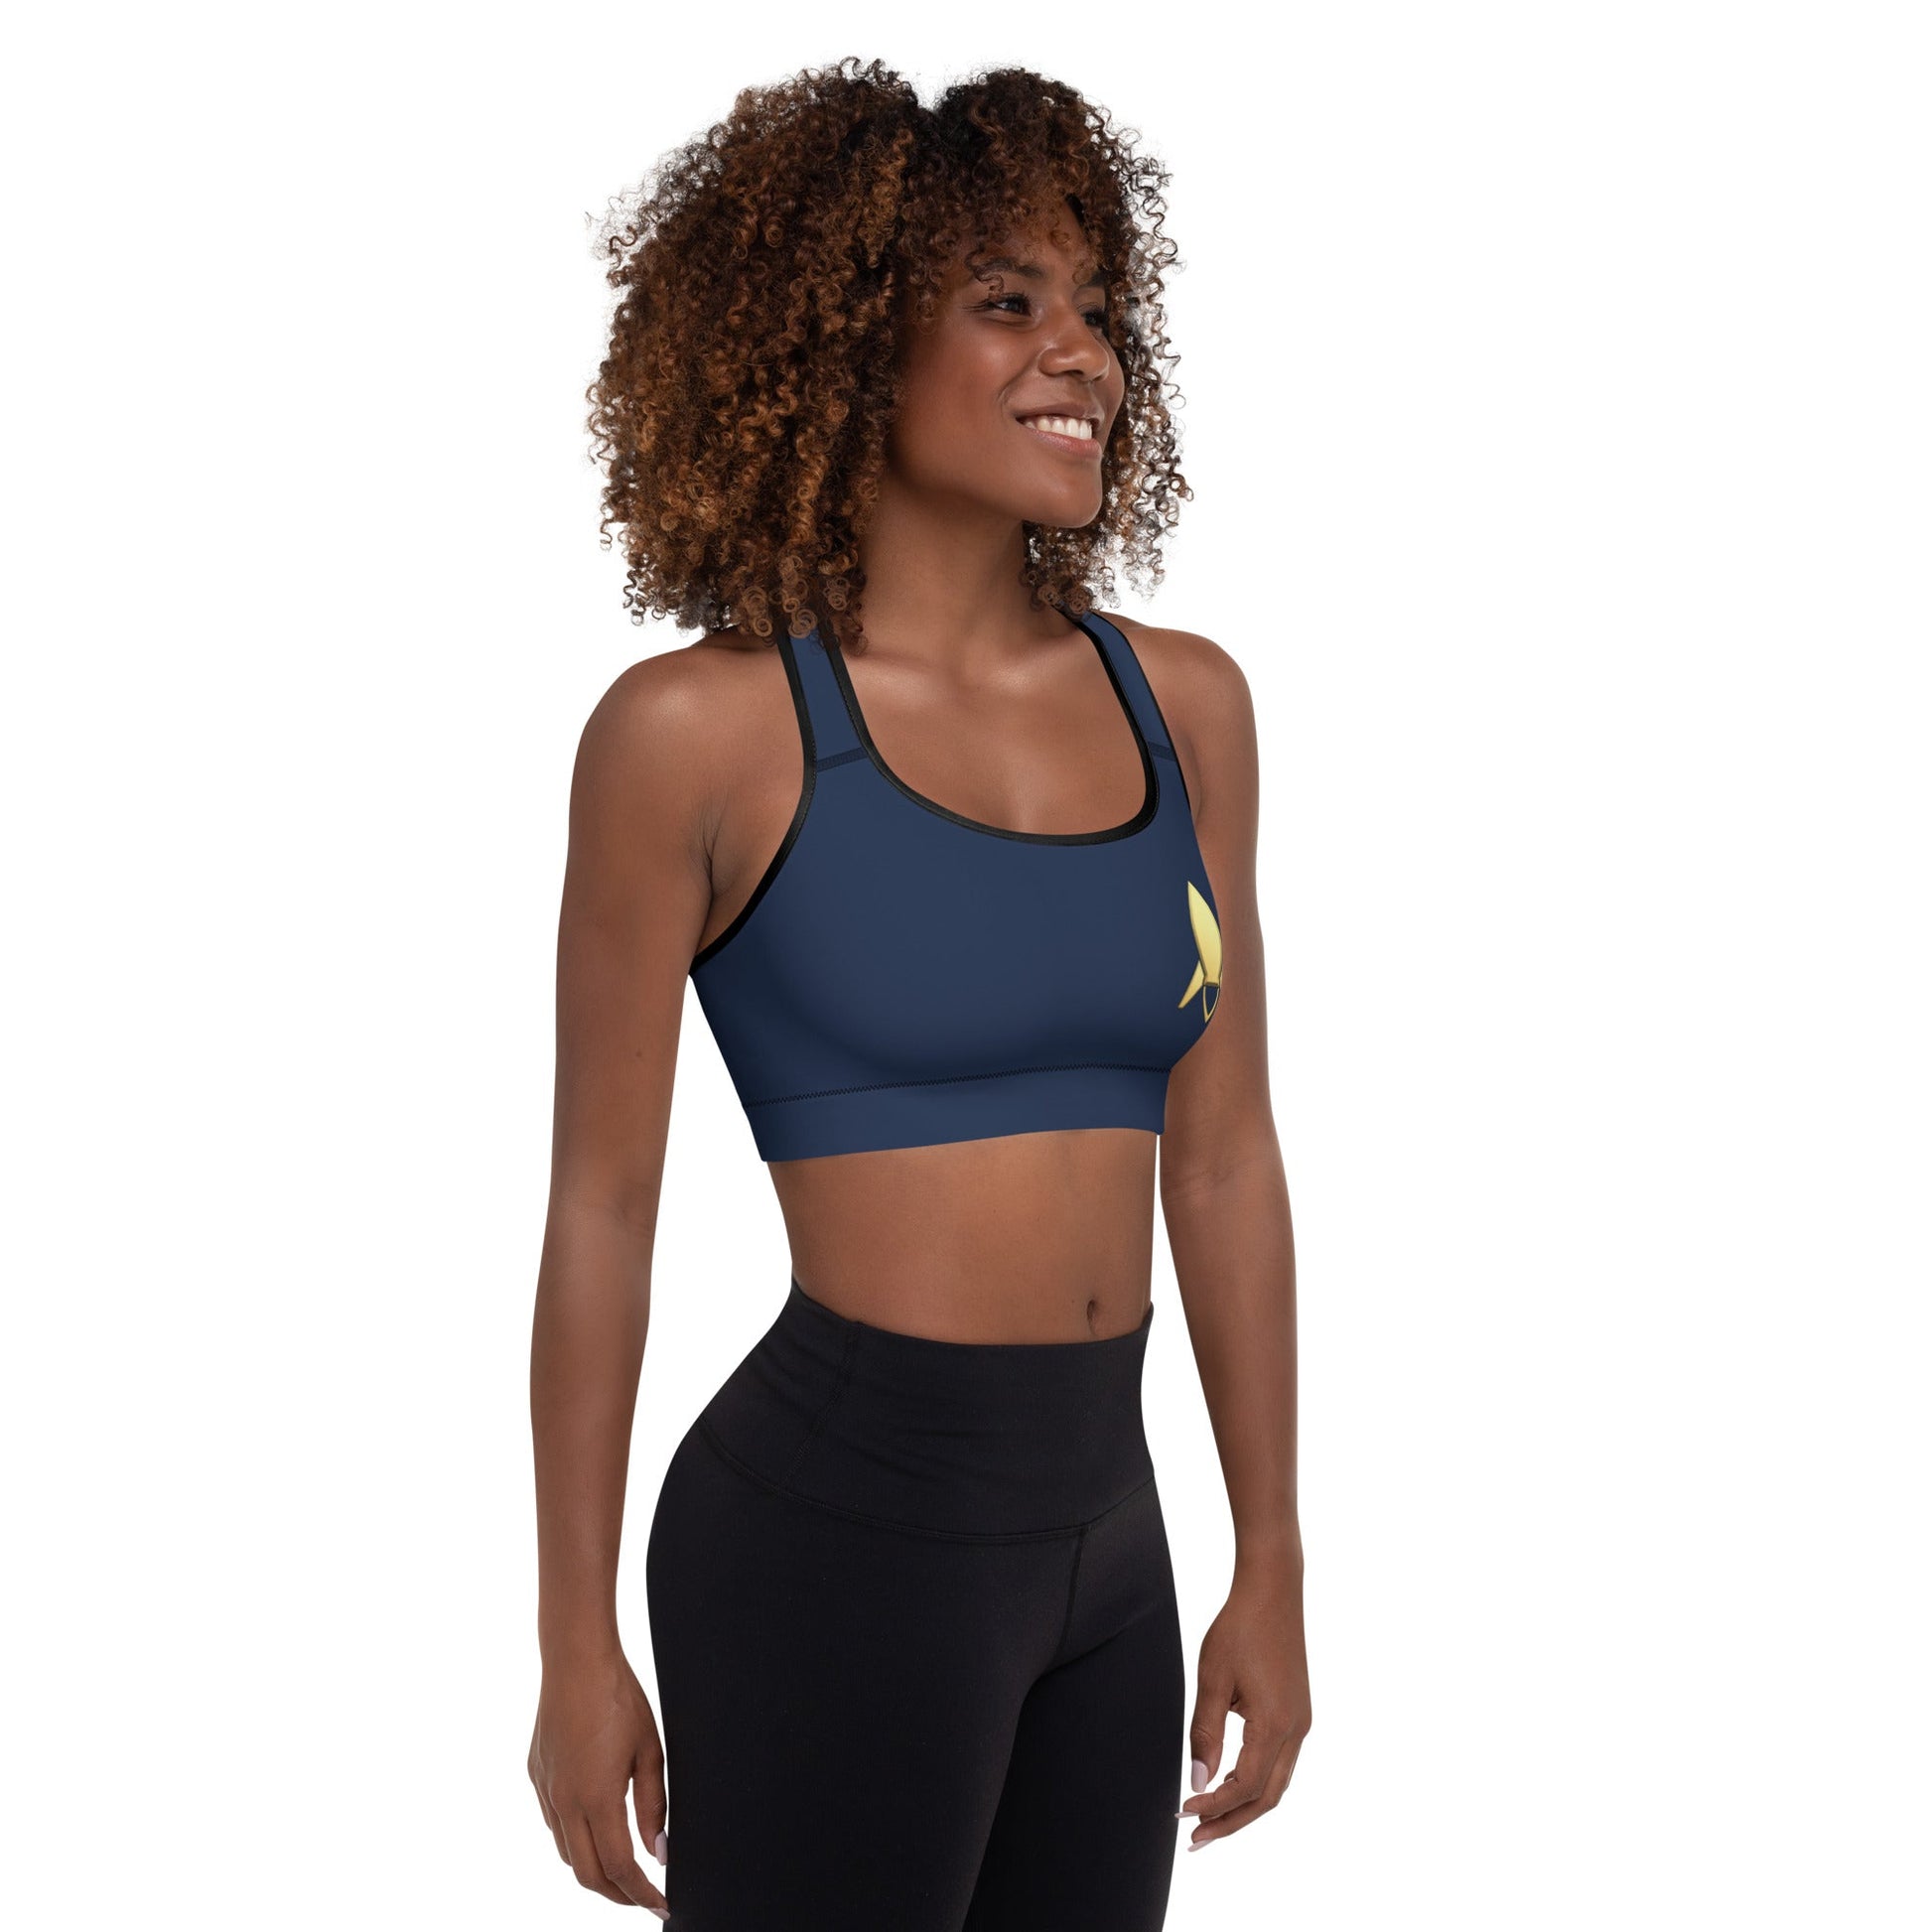 Padded Sports Bra | Intergalactic Space Force - Spectral Ink Shop - Sports Bra -5069519_10862